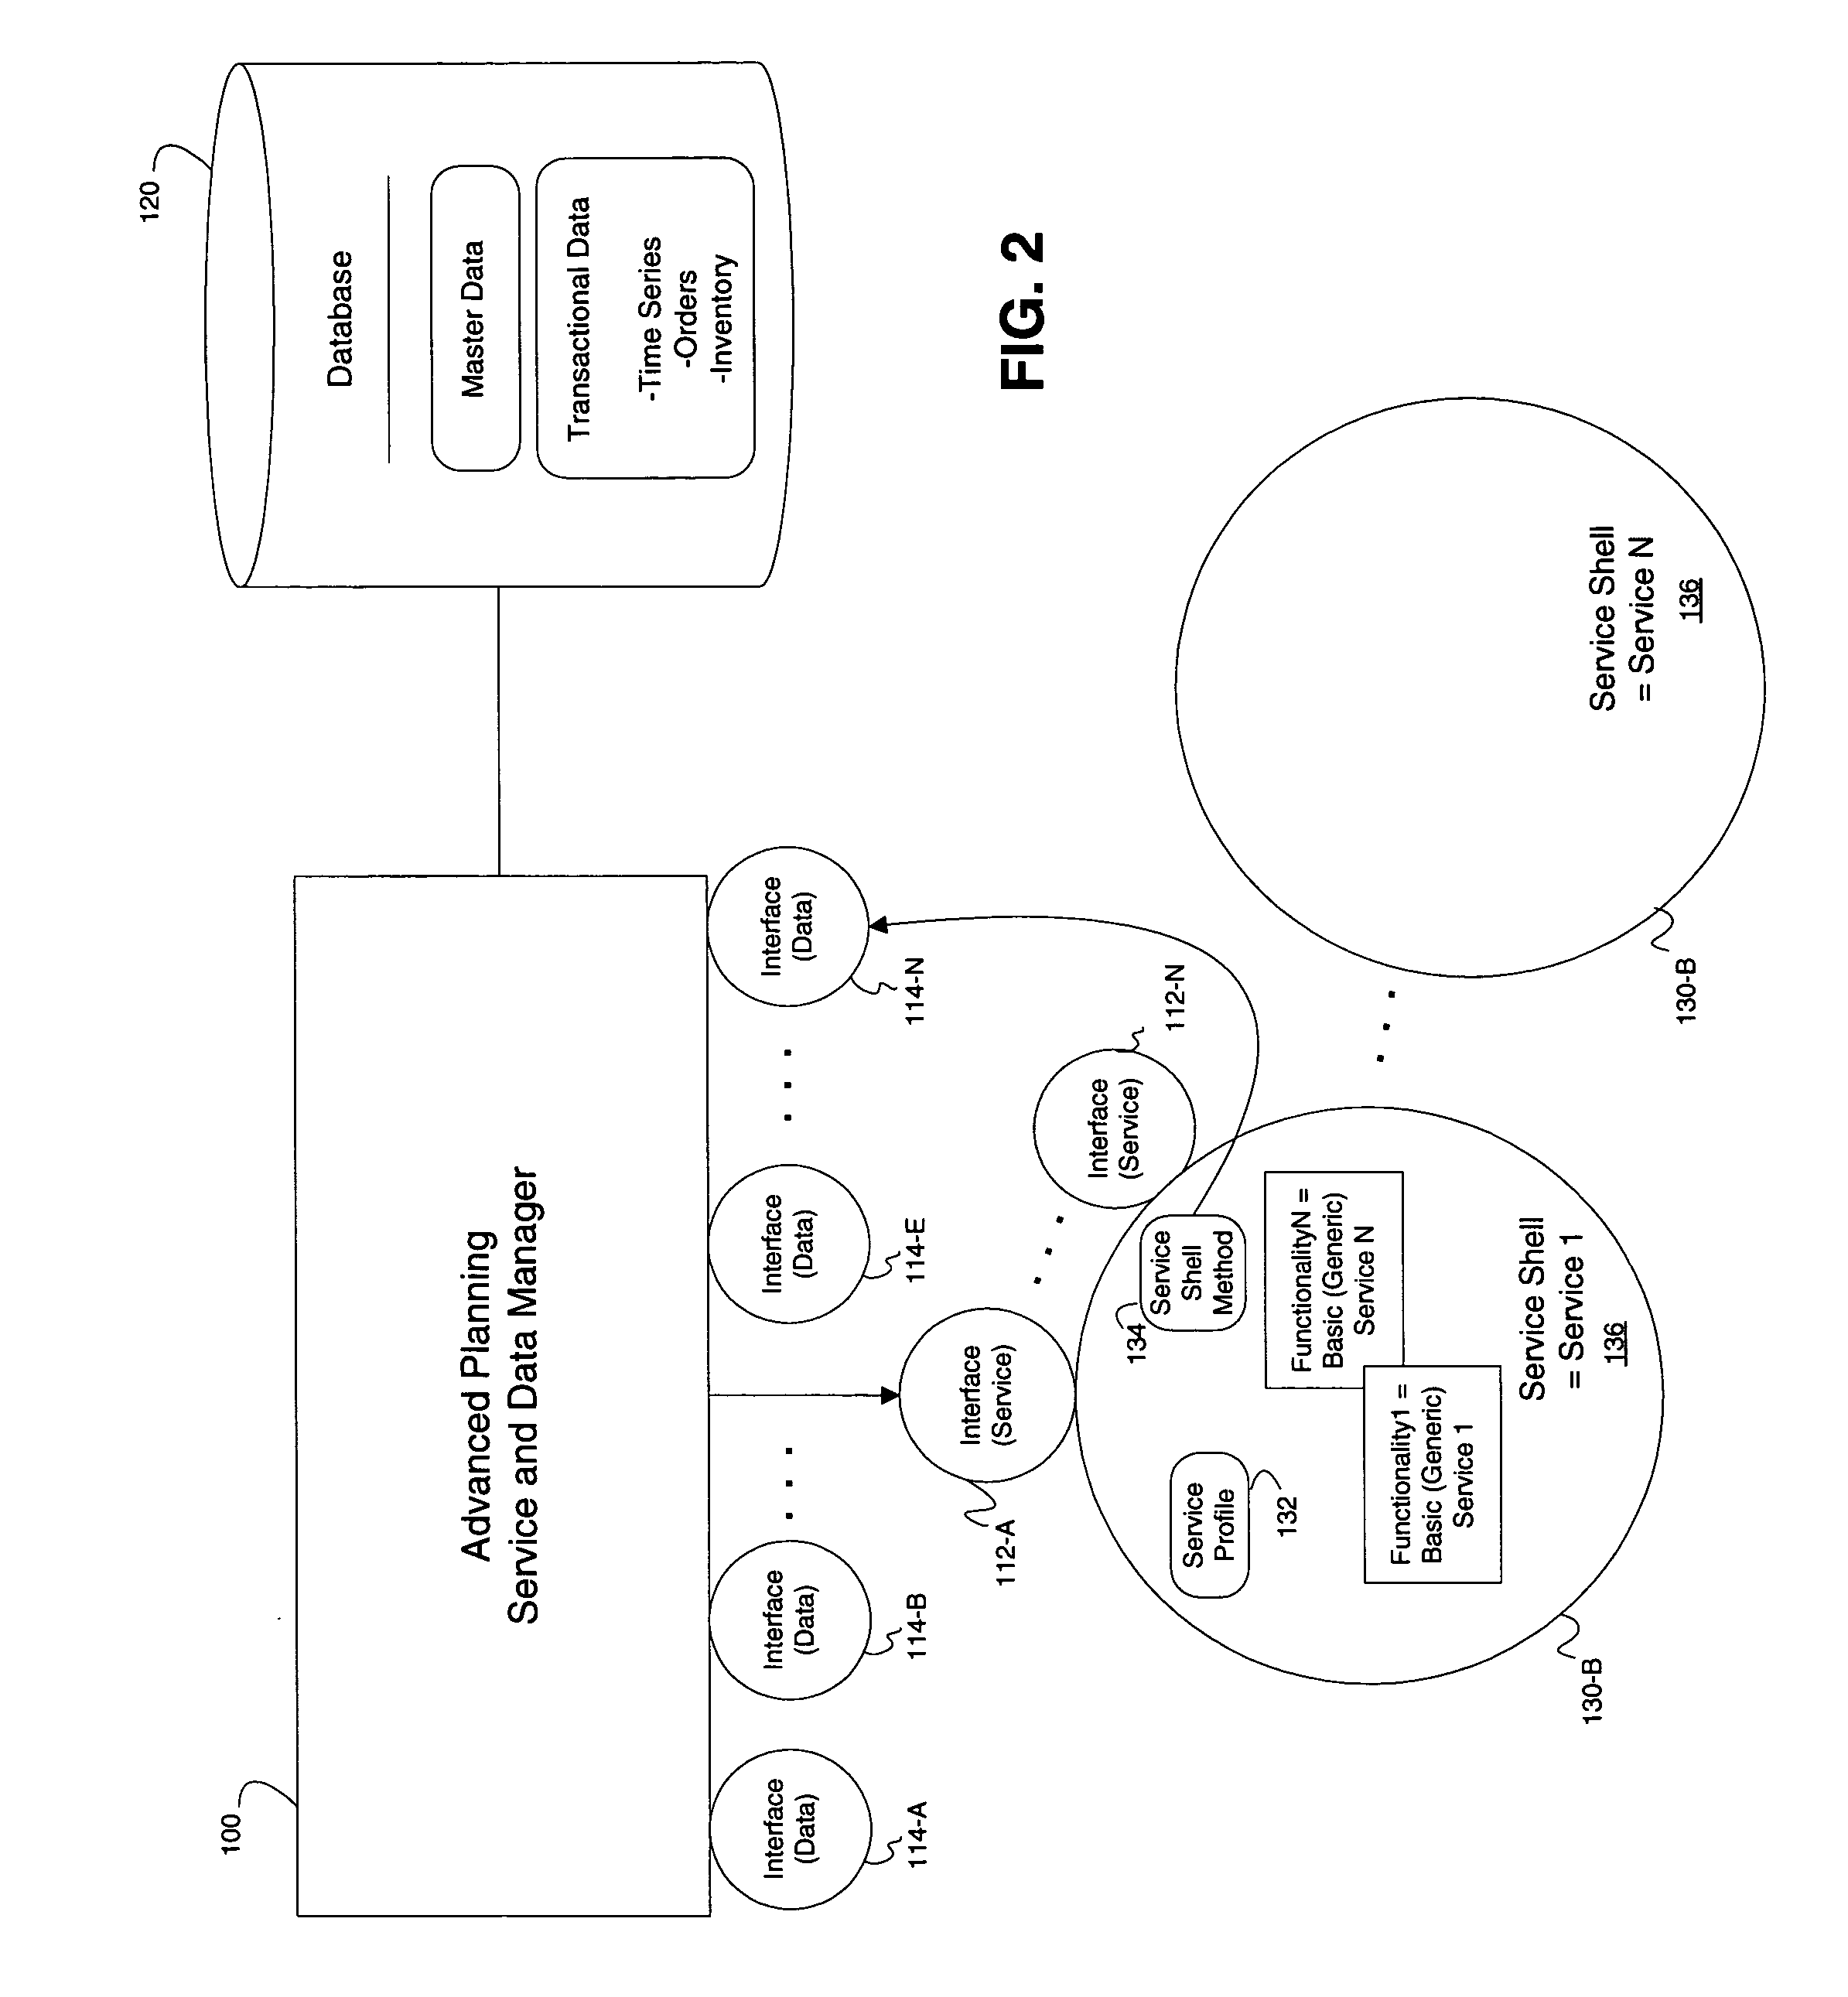 Systems and methods for executing planning services